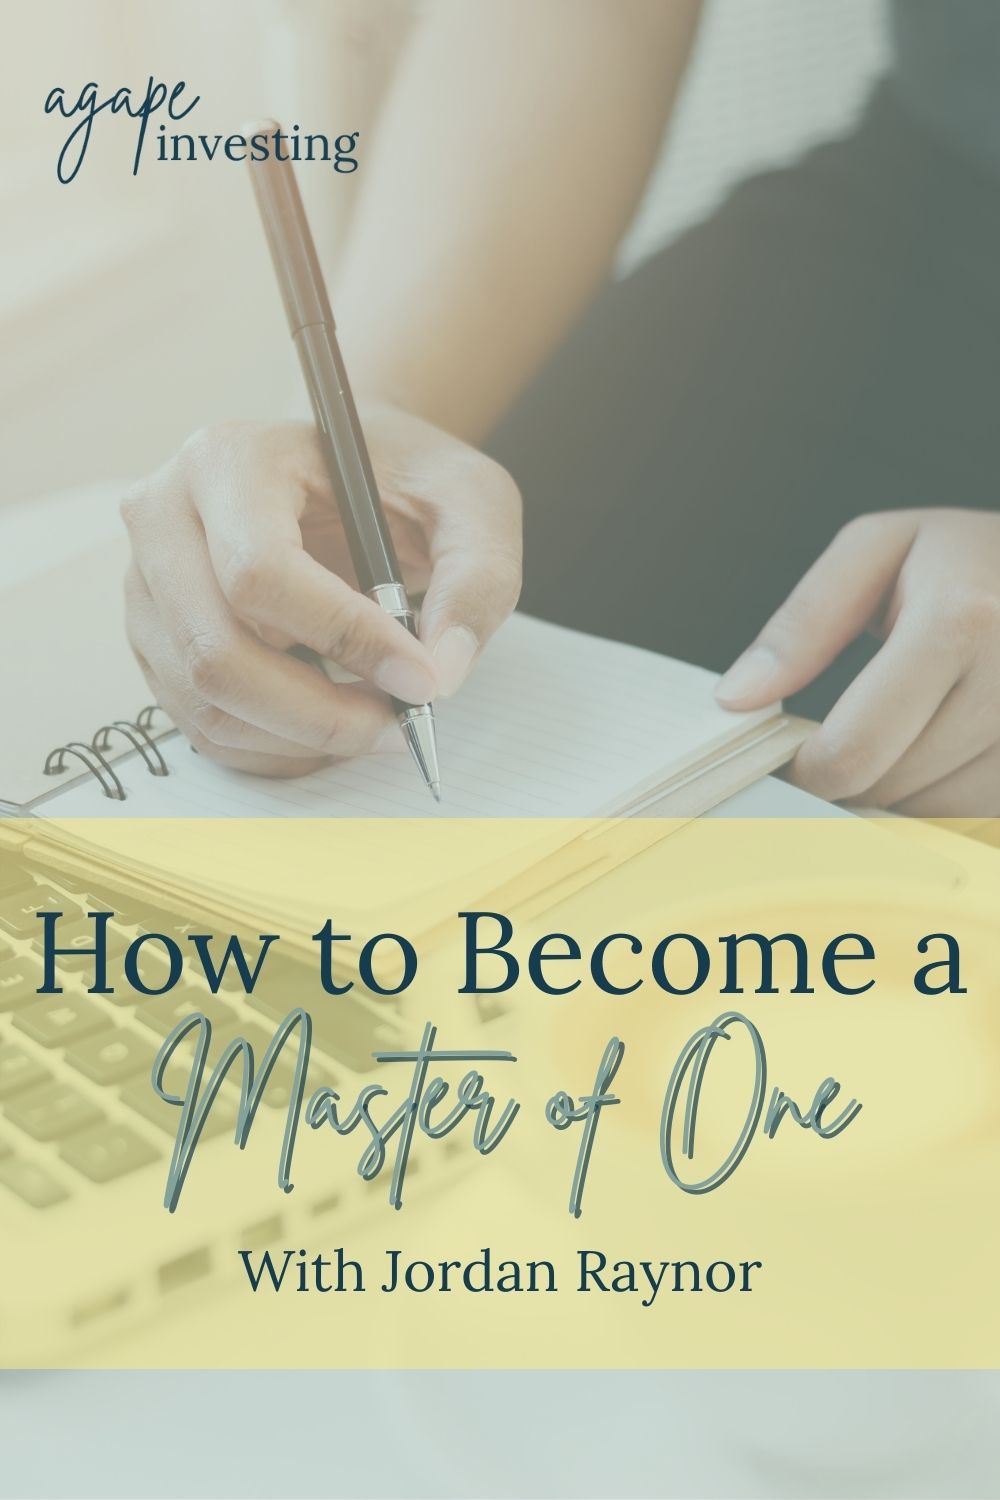 Watch my interview with Jordan Raynor as we chat about his new book Master of One. Find out more about the process of writing his first book, Called to Create, and Master of One. And hear a bit about who his favorite interviewees were while doing research for his book! #masterofone #masterofonebook #jordanraynor #faithandwork #christianbooks 